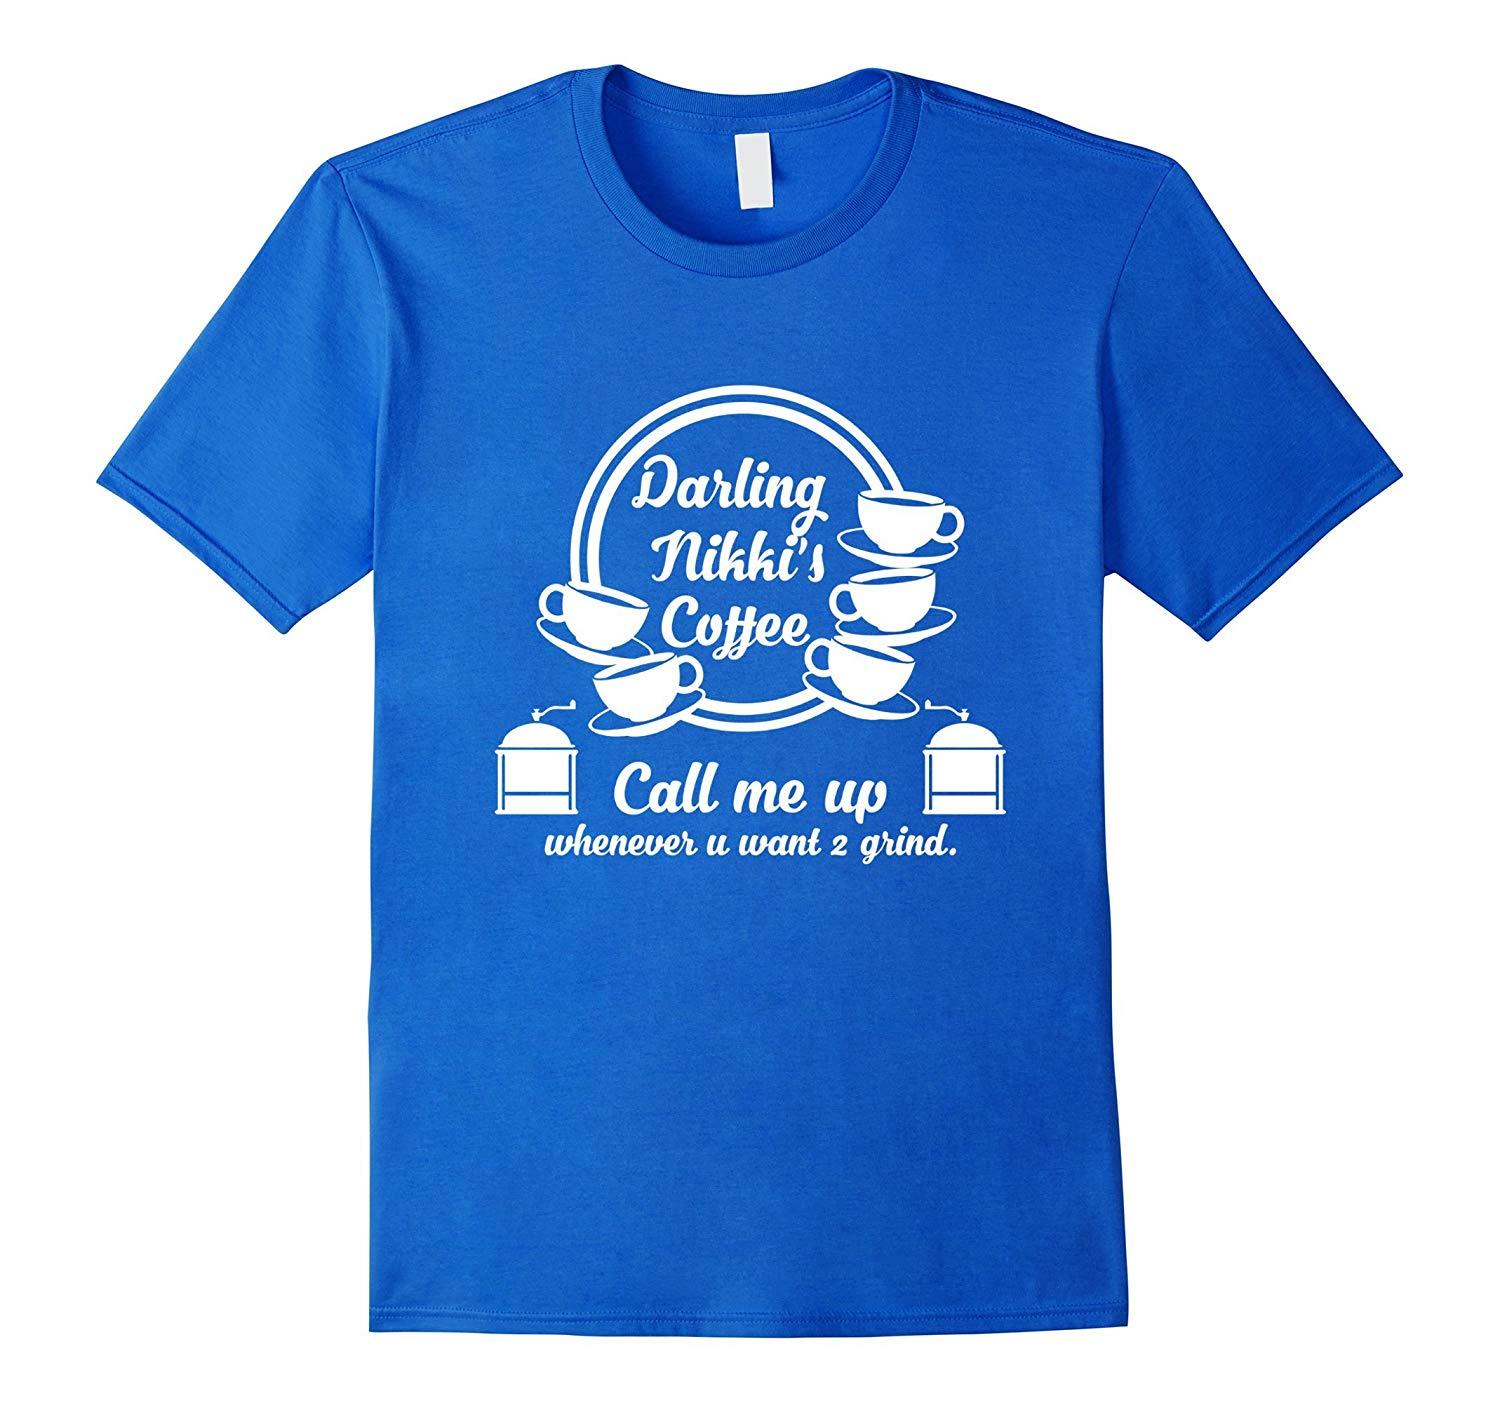 New Shirts - Darling Nikki's Coffee Call Me Up Whenever U Want T-Shirt ...